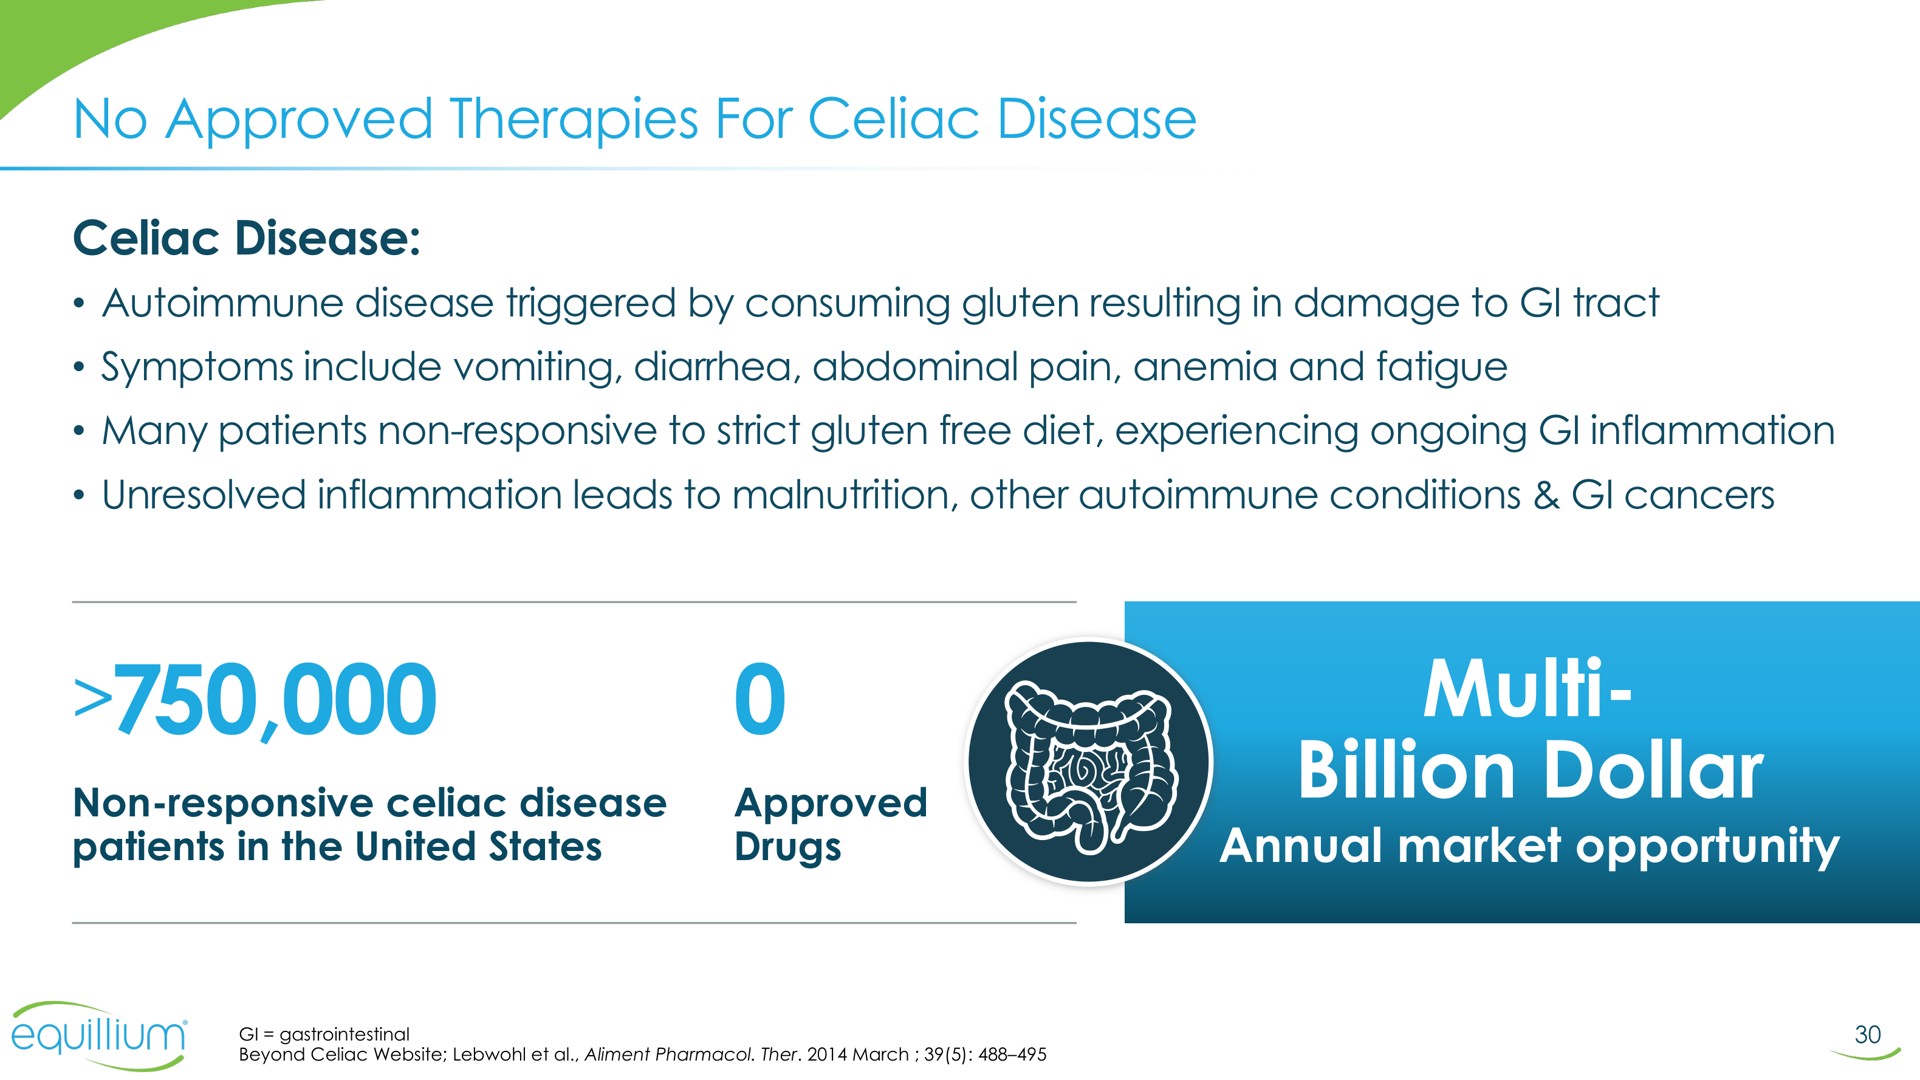 no approved therapies for celiac disease celiac disease billion dollar annual market opportunity me | Equillium